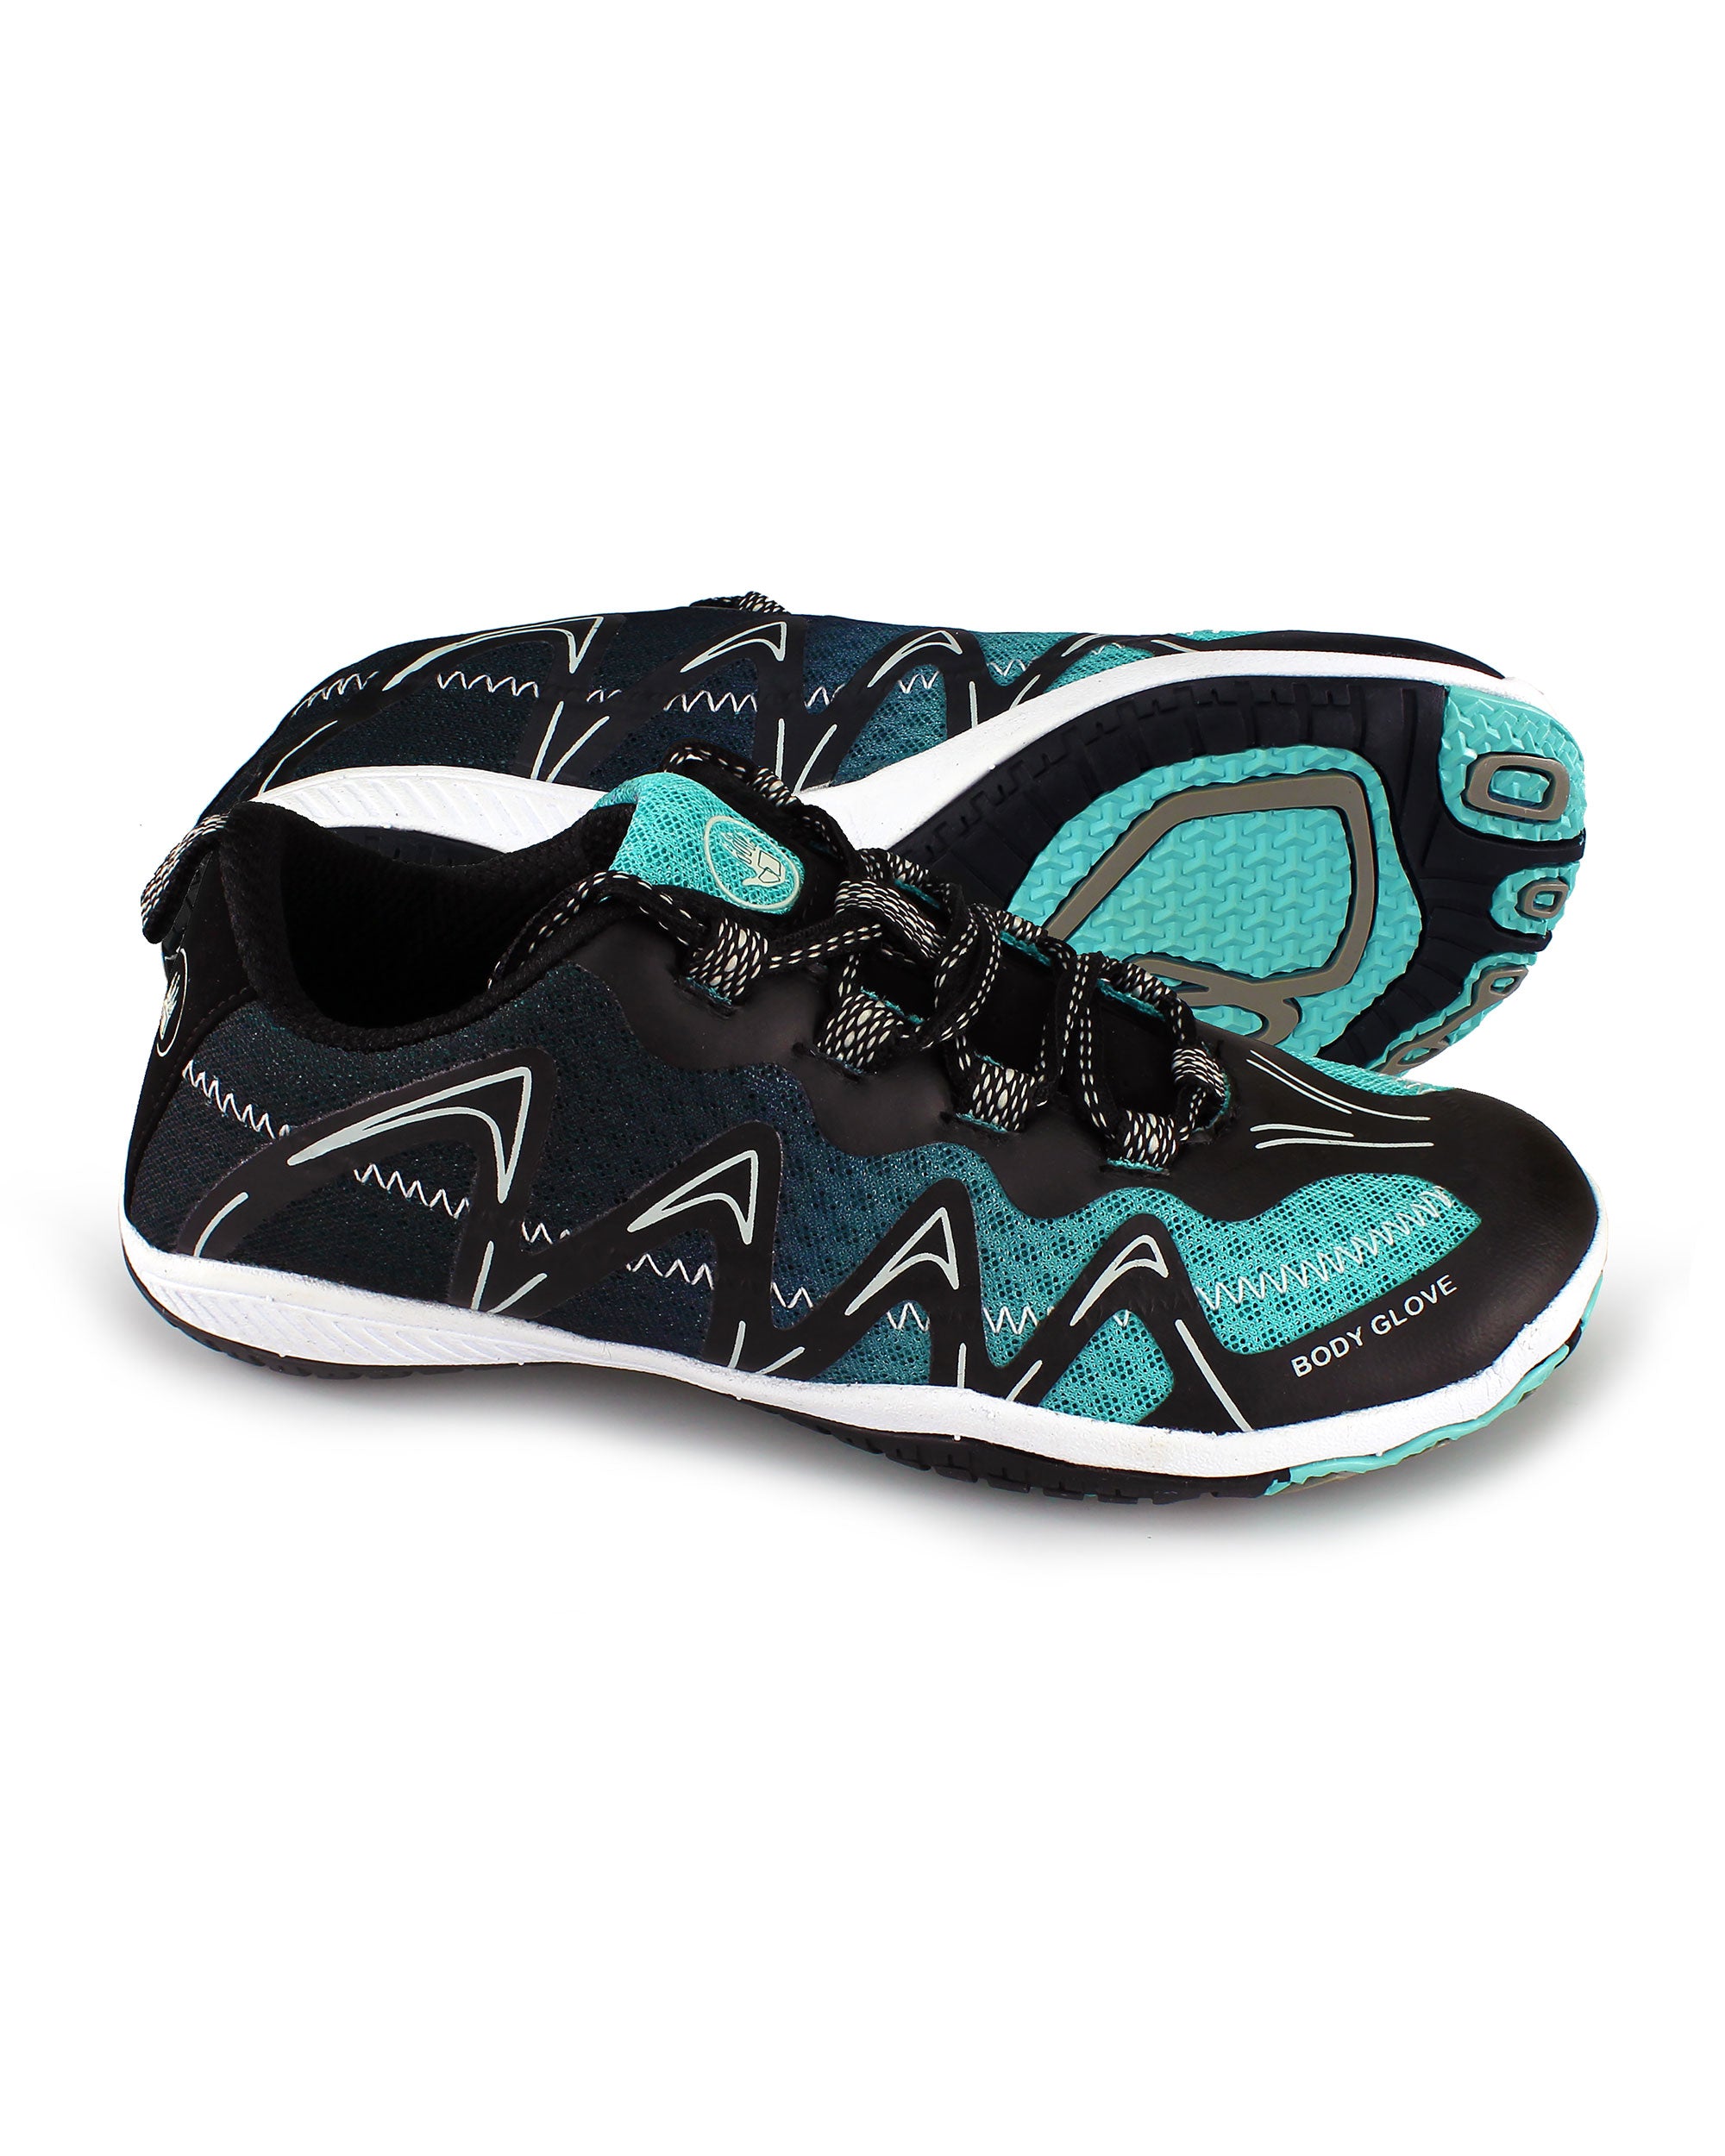 body glove hydra water shoes